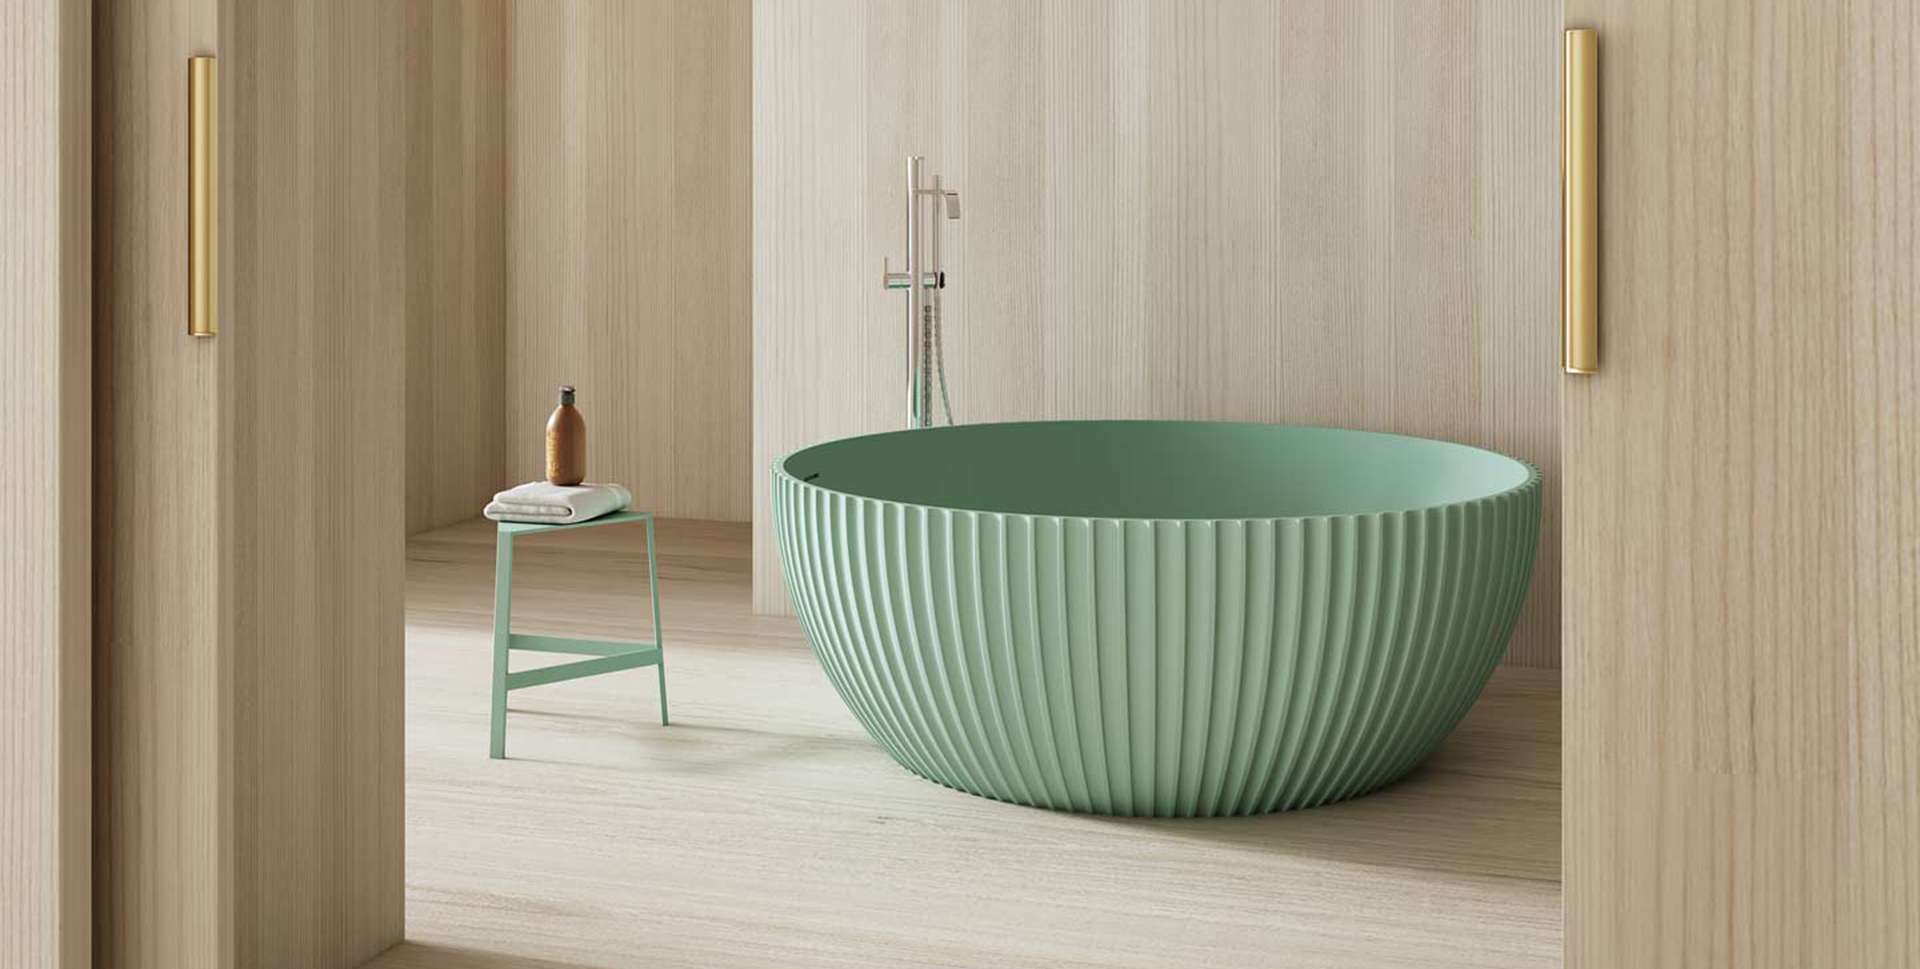 How To Choose the Perfect Freestanding Bathbub?